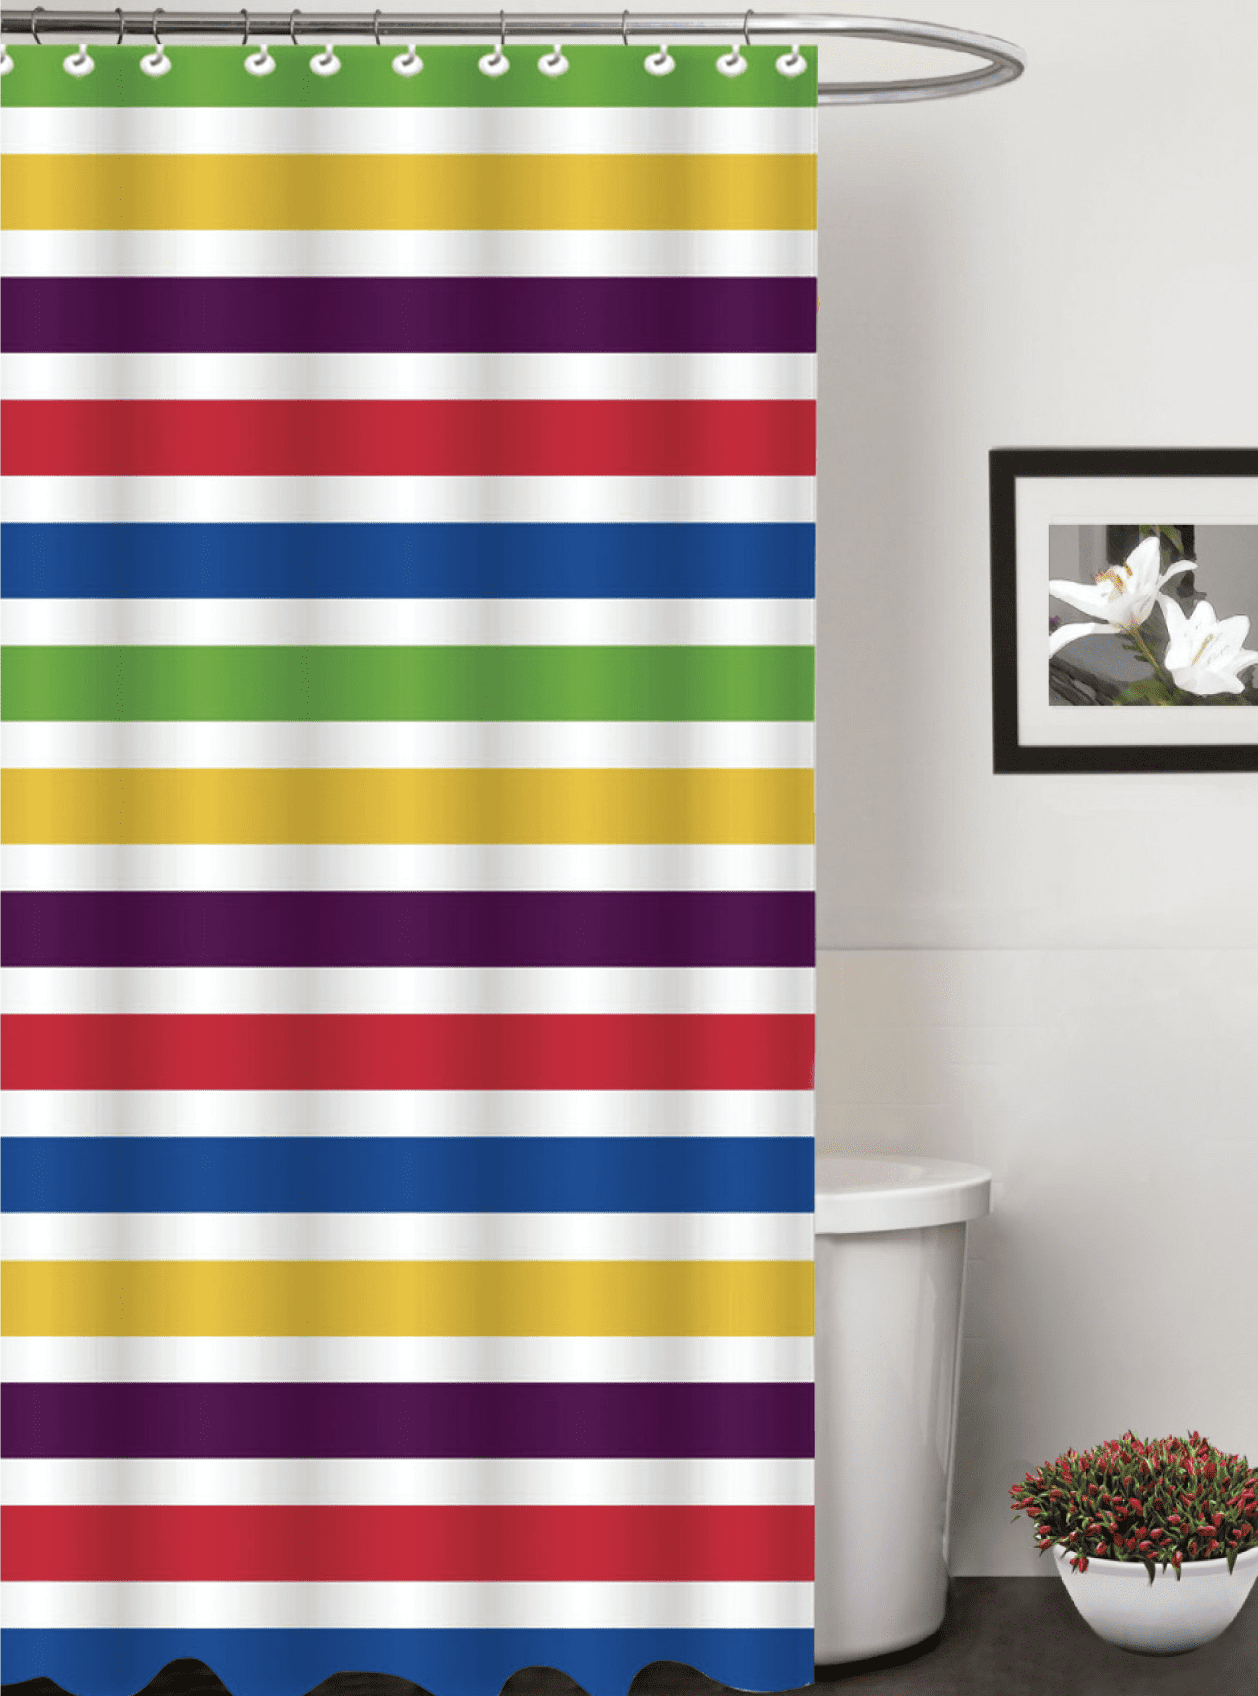 Colorful 72 x72 inch Modern Style Hotel Quality Bath Curtain Set with Hooks favonian Colorful Rainbow Stripe Fabric Shower Curtain for Bathroom